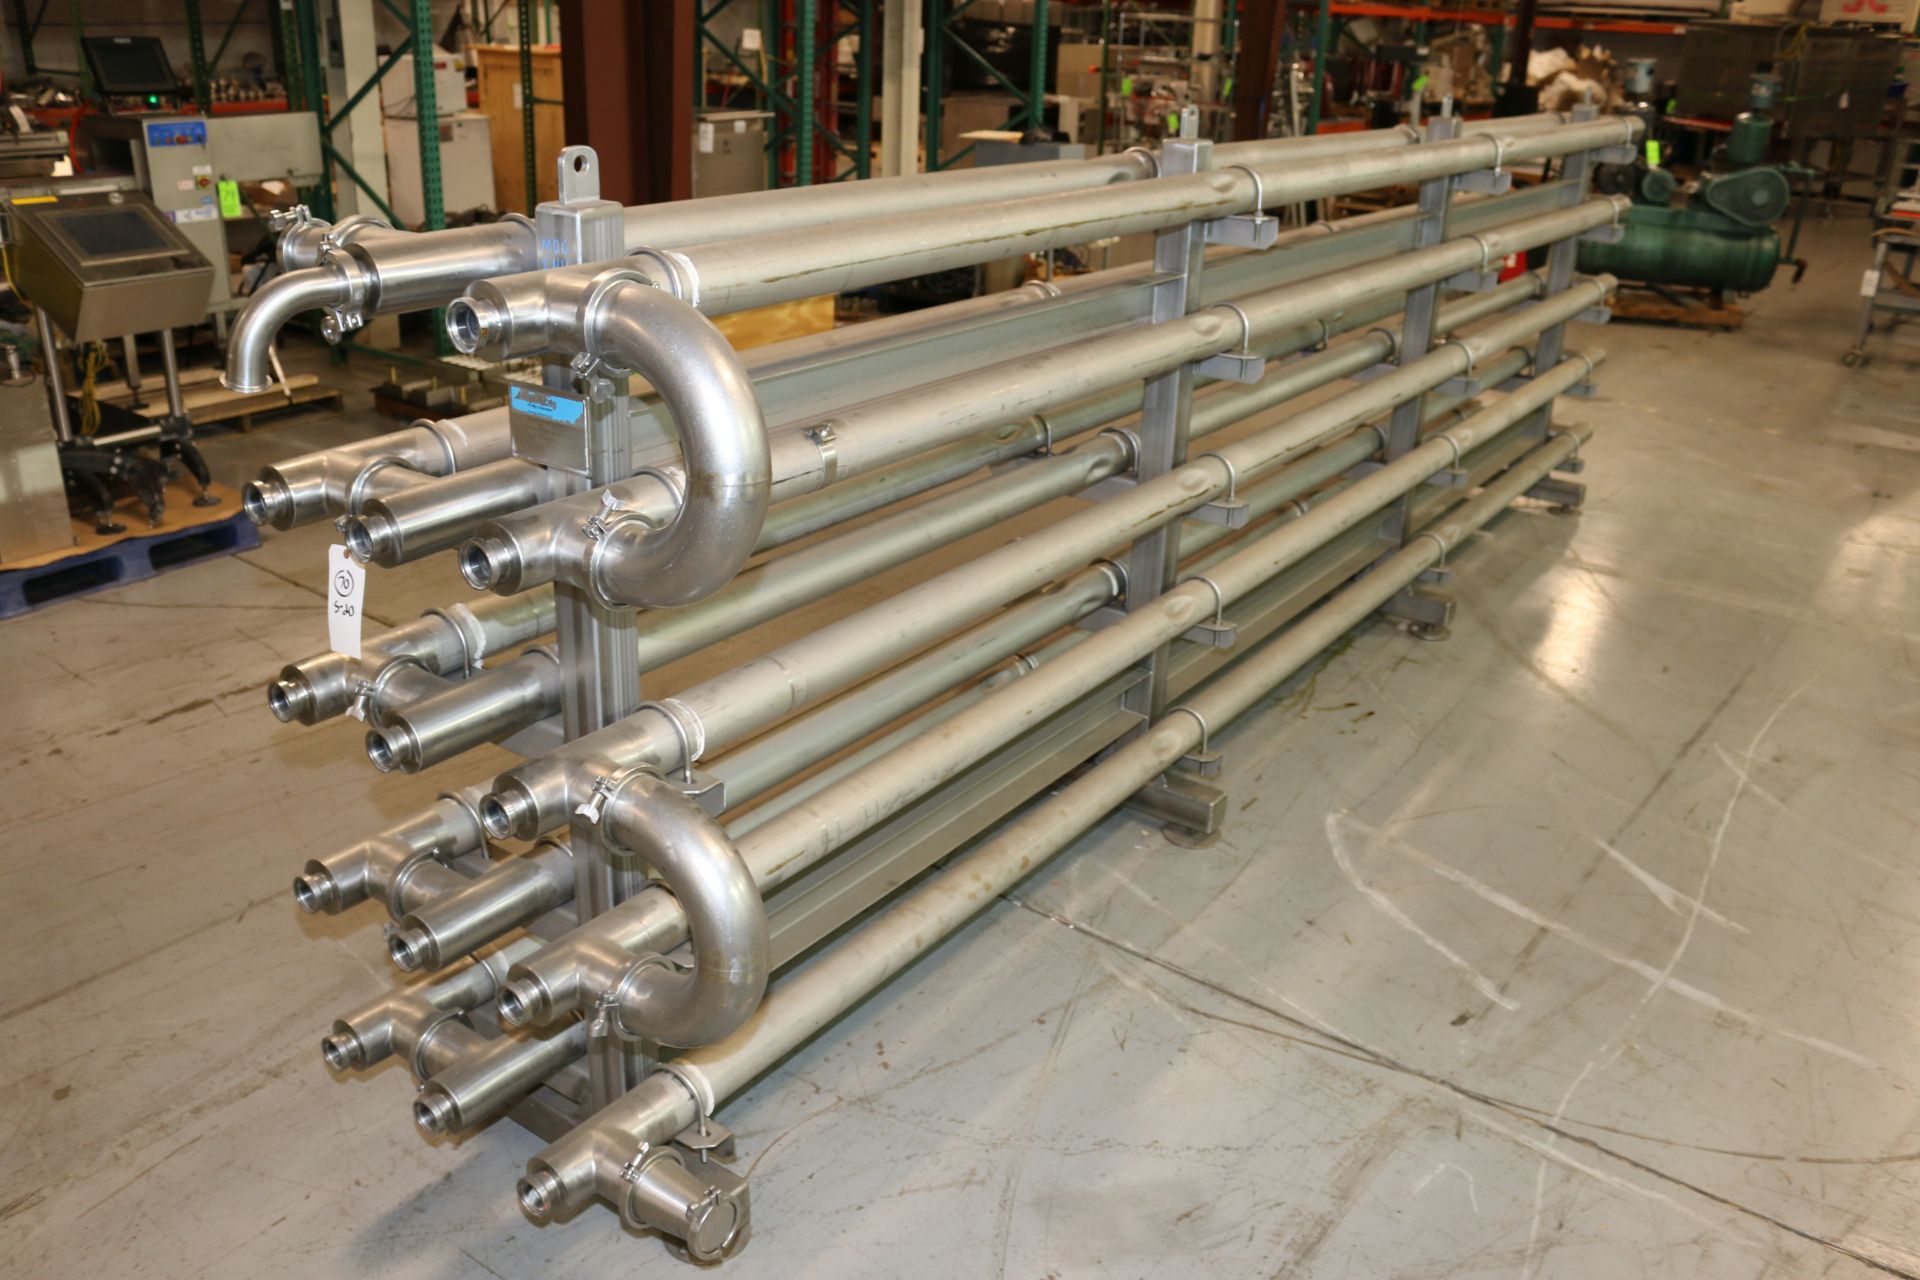 FranRica 14-Pass Dimpled Tube Heat Exchanger, M/N OES01-CX-01, PAT. #: 5.375.654, Overall Dims.: - Image 5 of 11